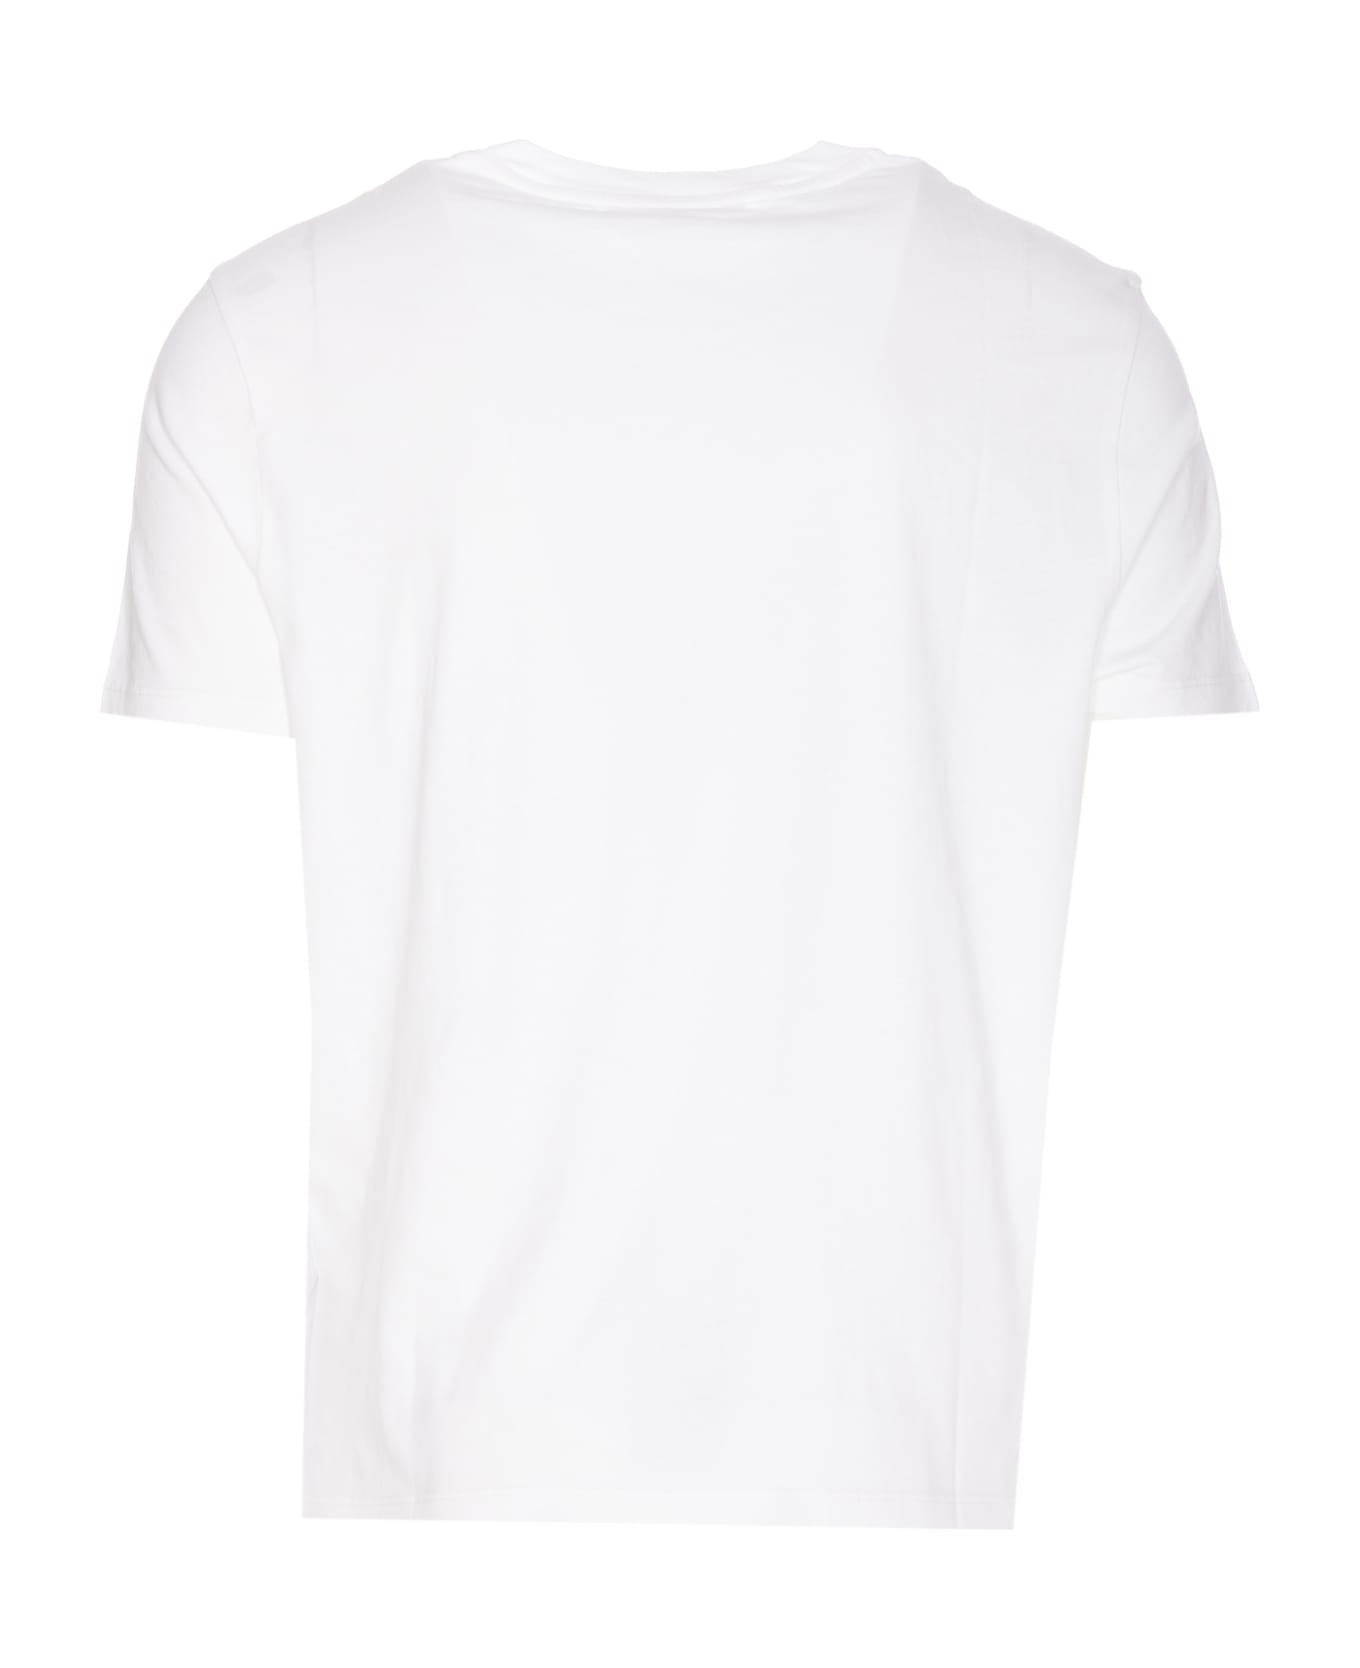 Zadig & Voltaire Ted Hc T-shirt - White